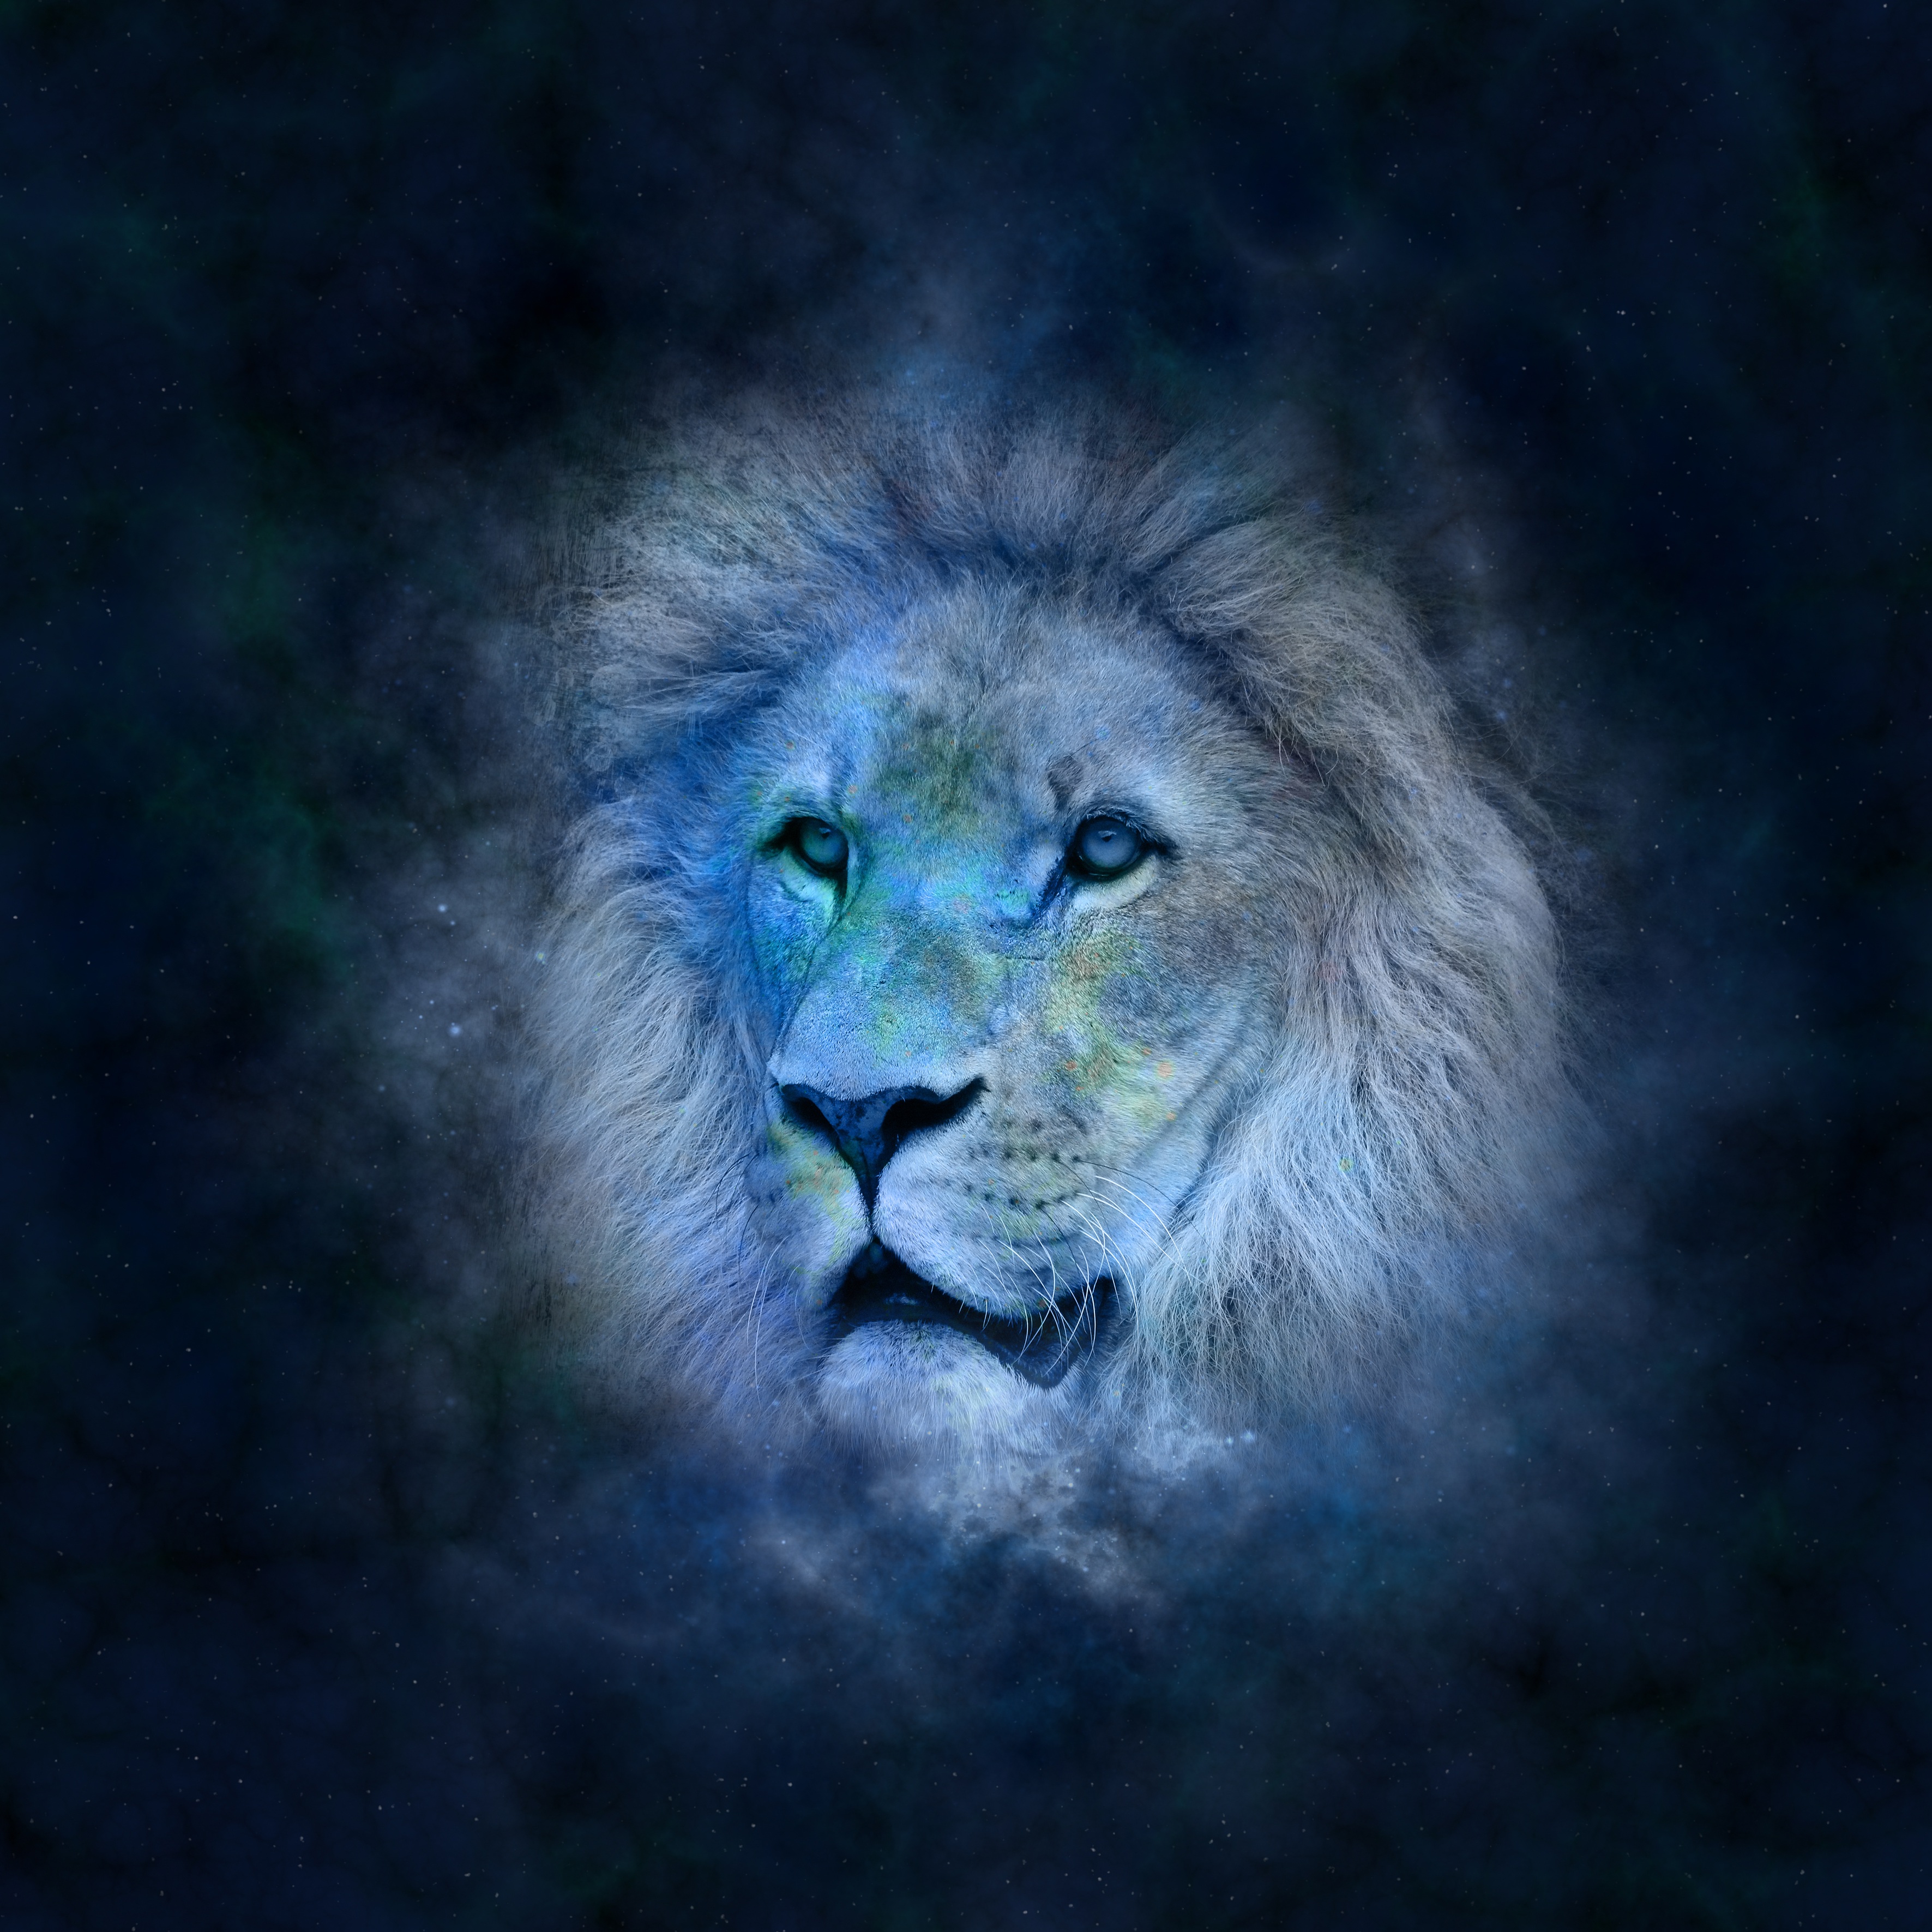 132977 download wallpaper art, muzzle, lion, space, mane, cosmic screensavers and pictures for free